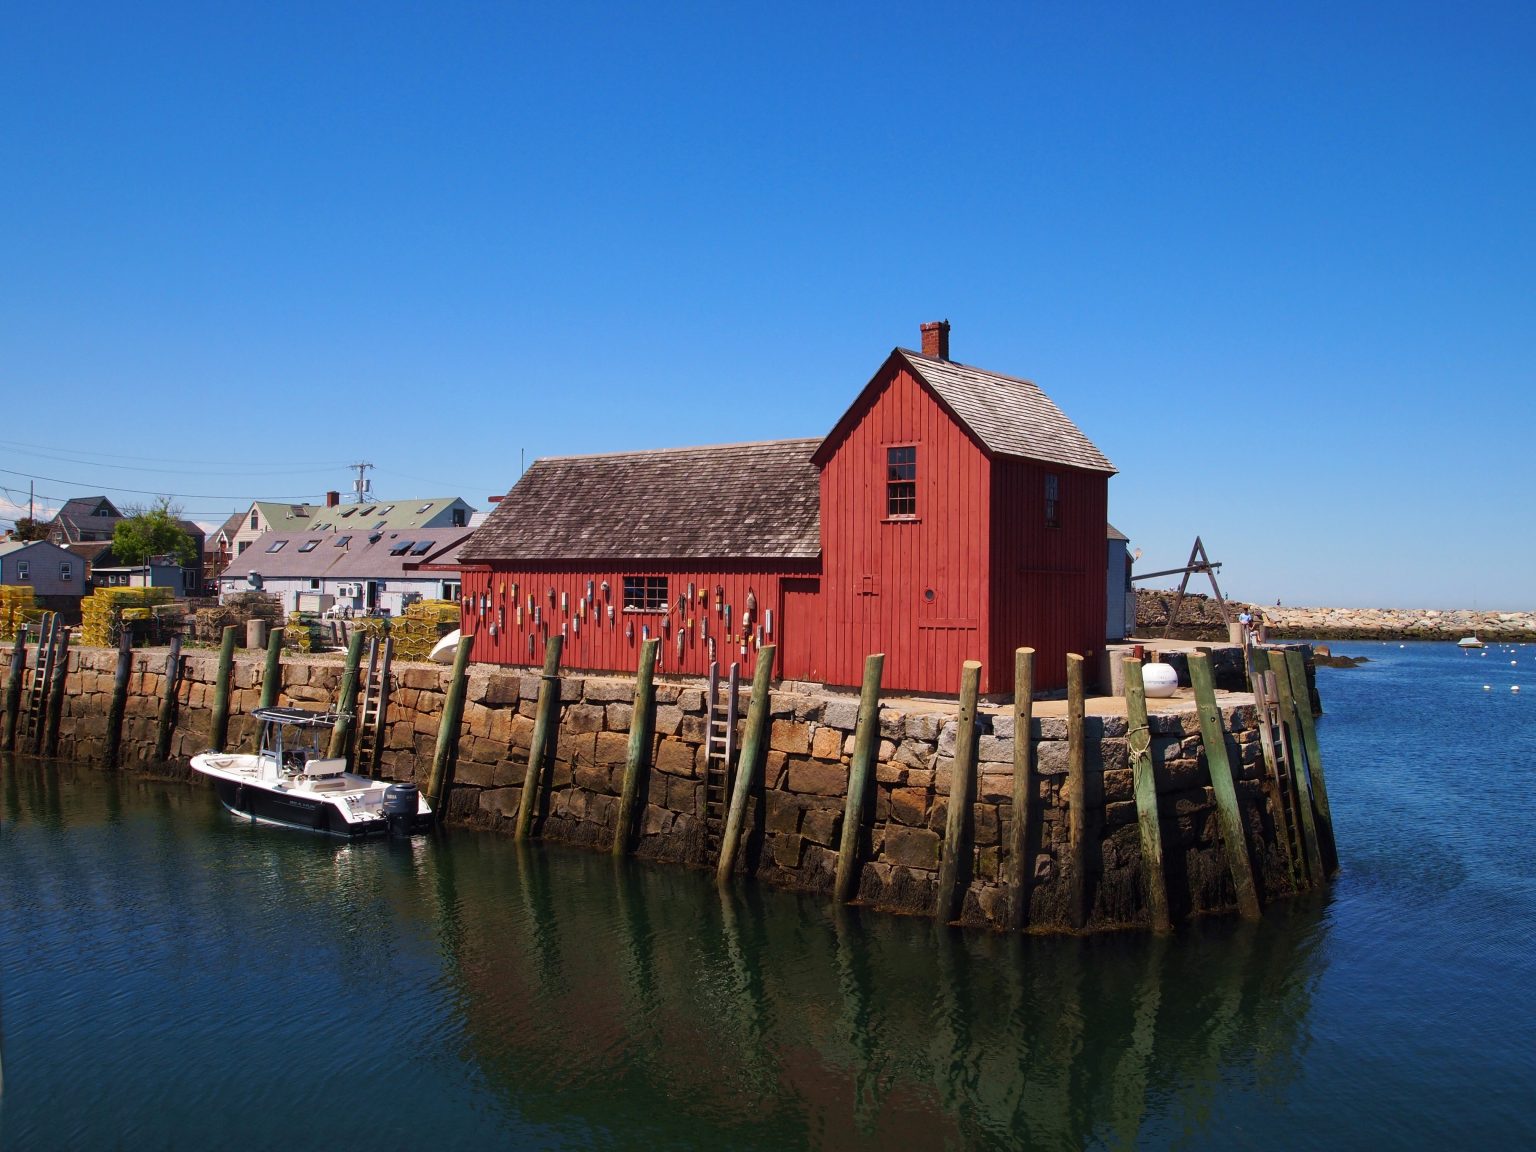 On the Market: A Picturesque Tiny Home on Rockport's Storied Harbor